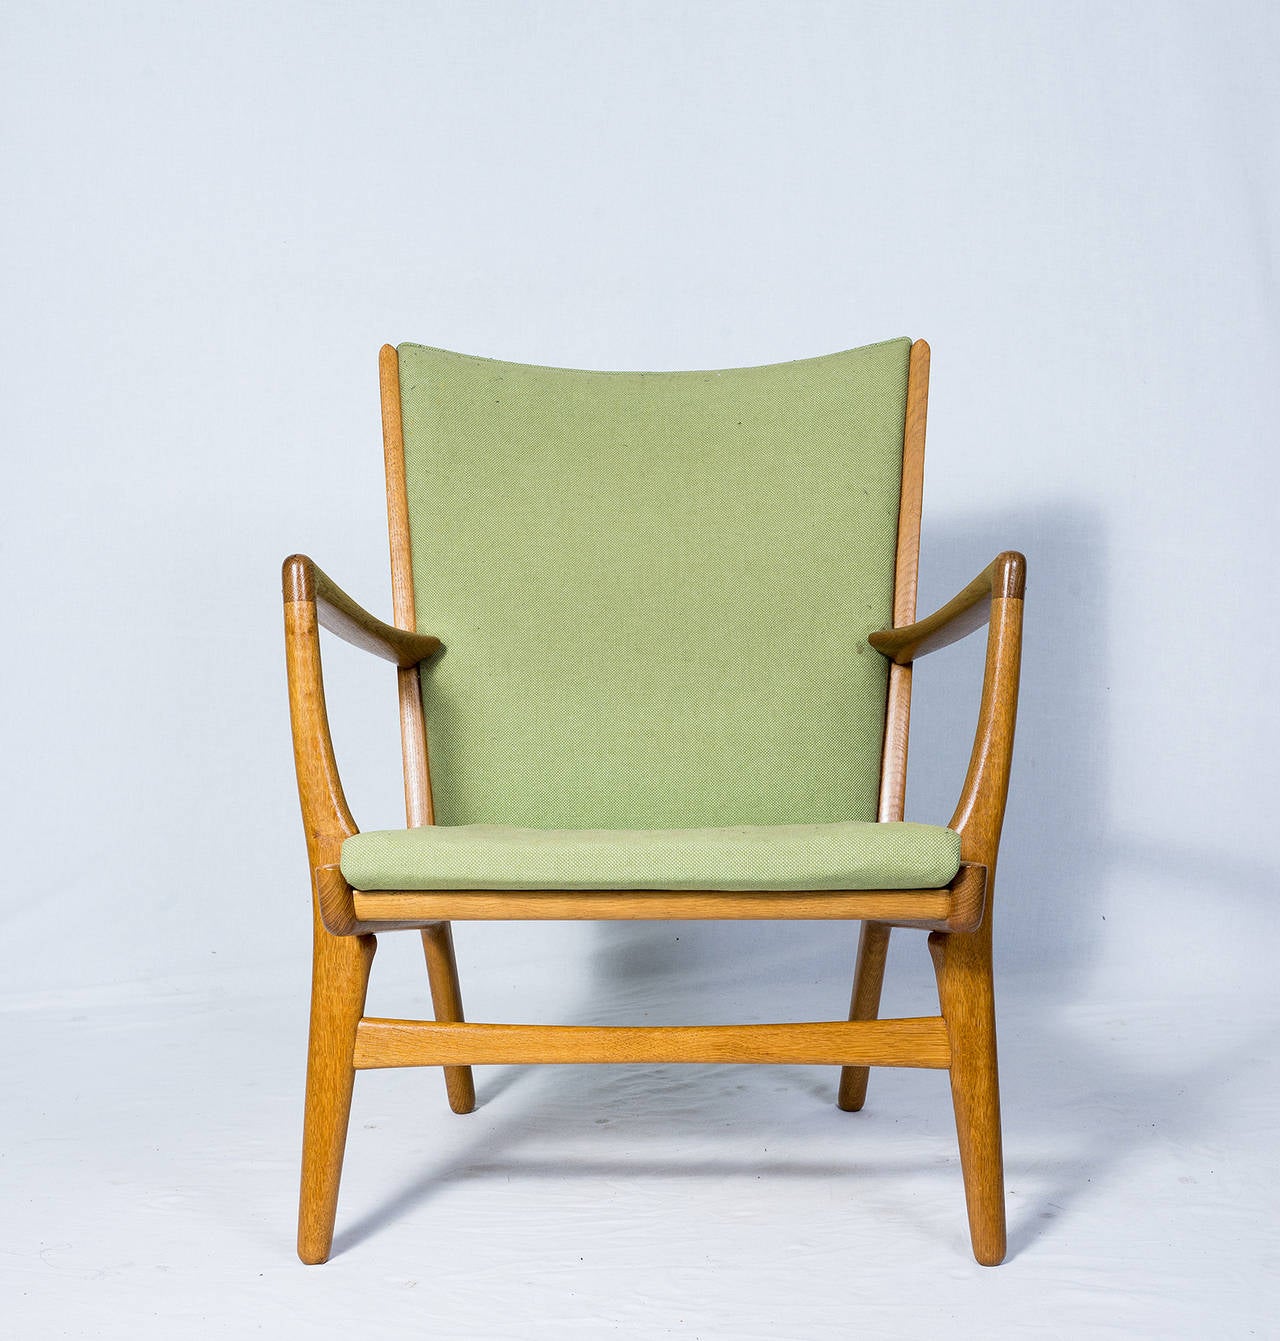 Hans Wegner AP-16 lounge chair designed in 1951 and produced by AP Stolen. Store formerly known as ARTFUL DODGER INC